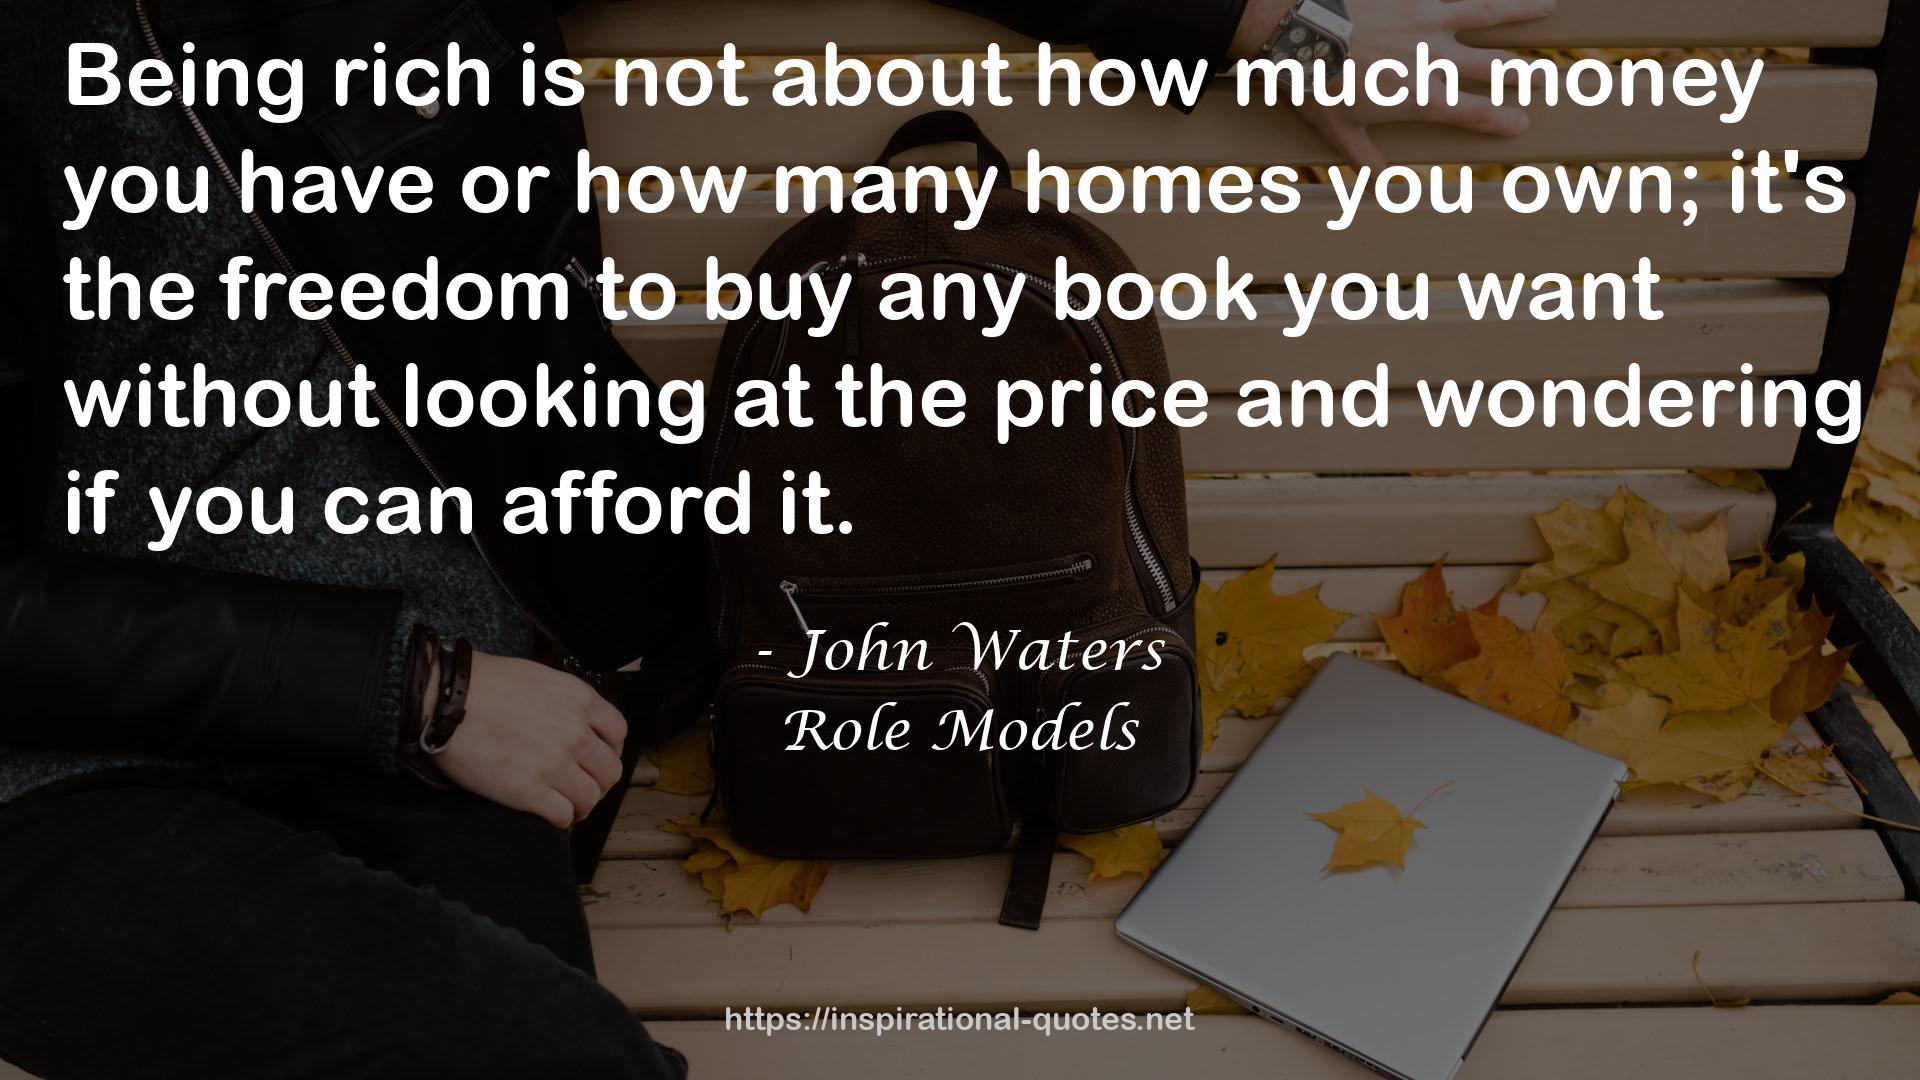 John Waters QUOTES